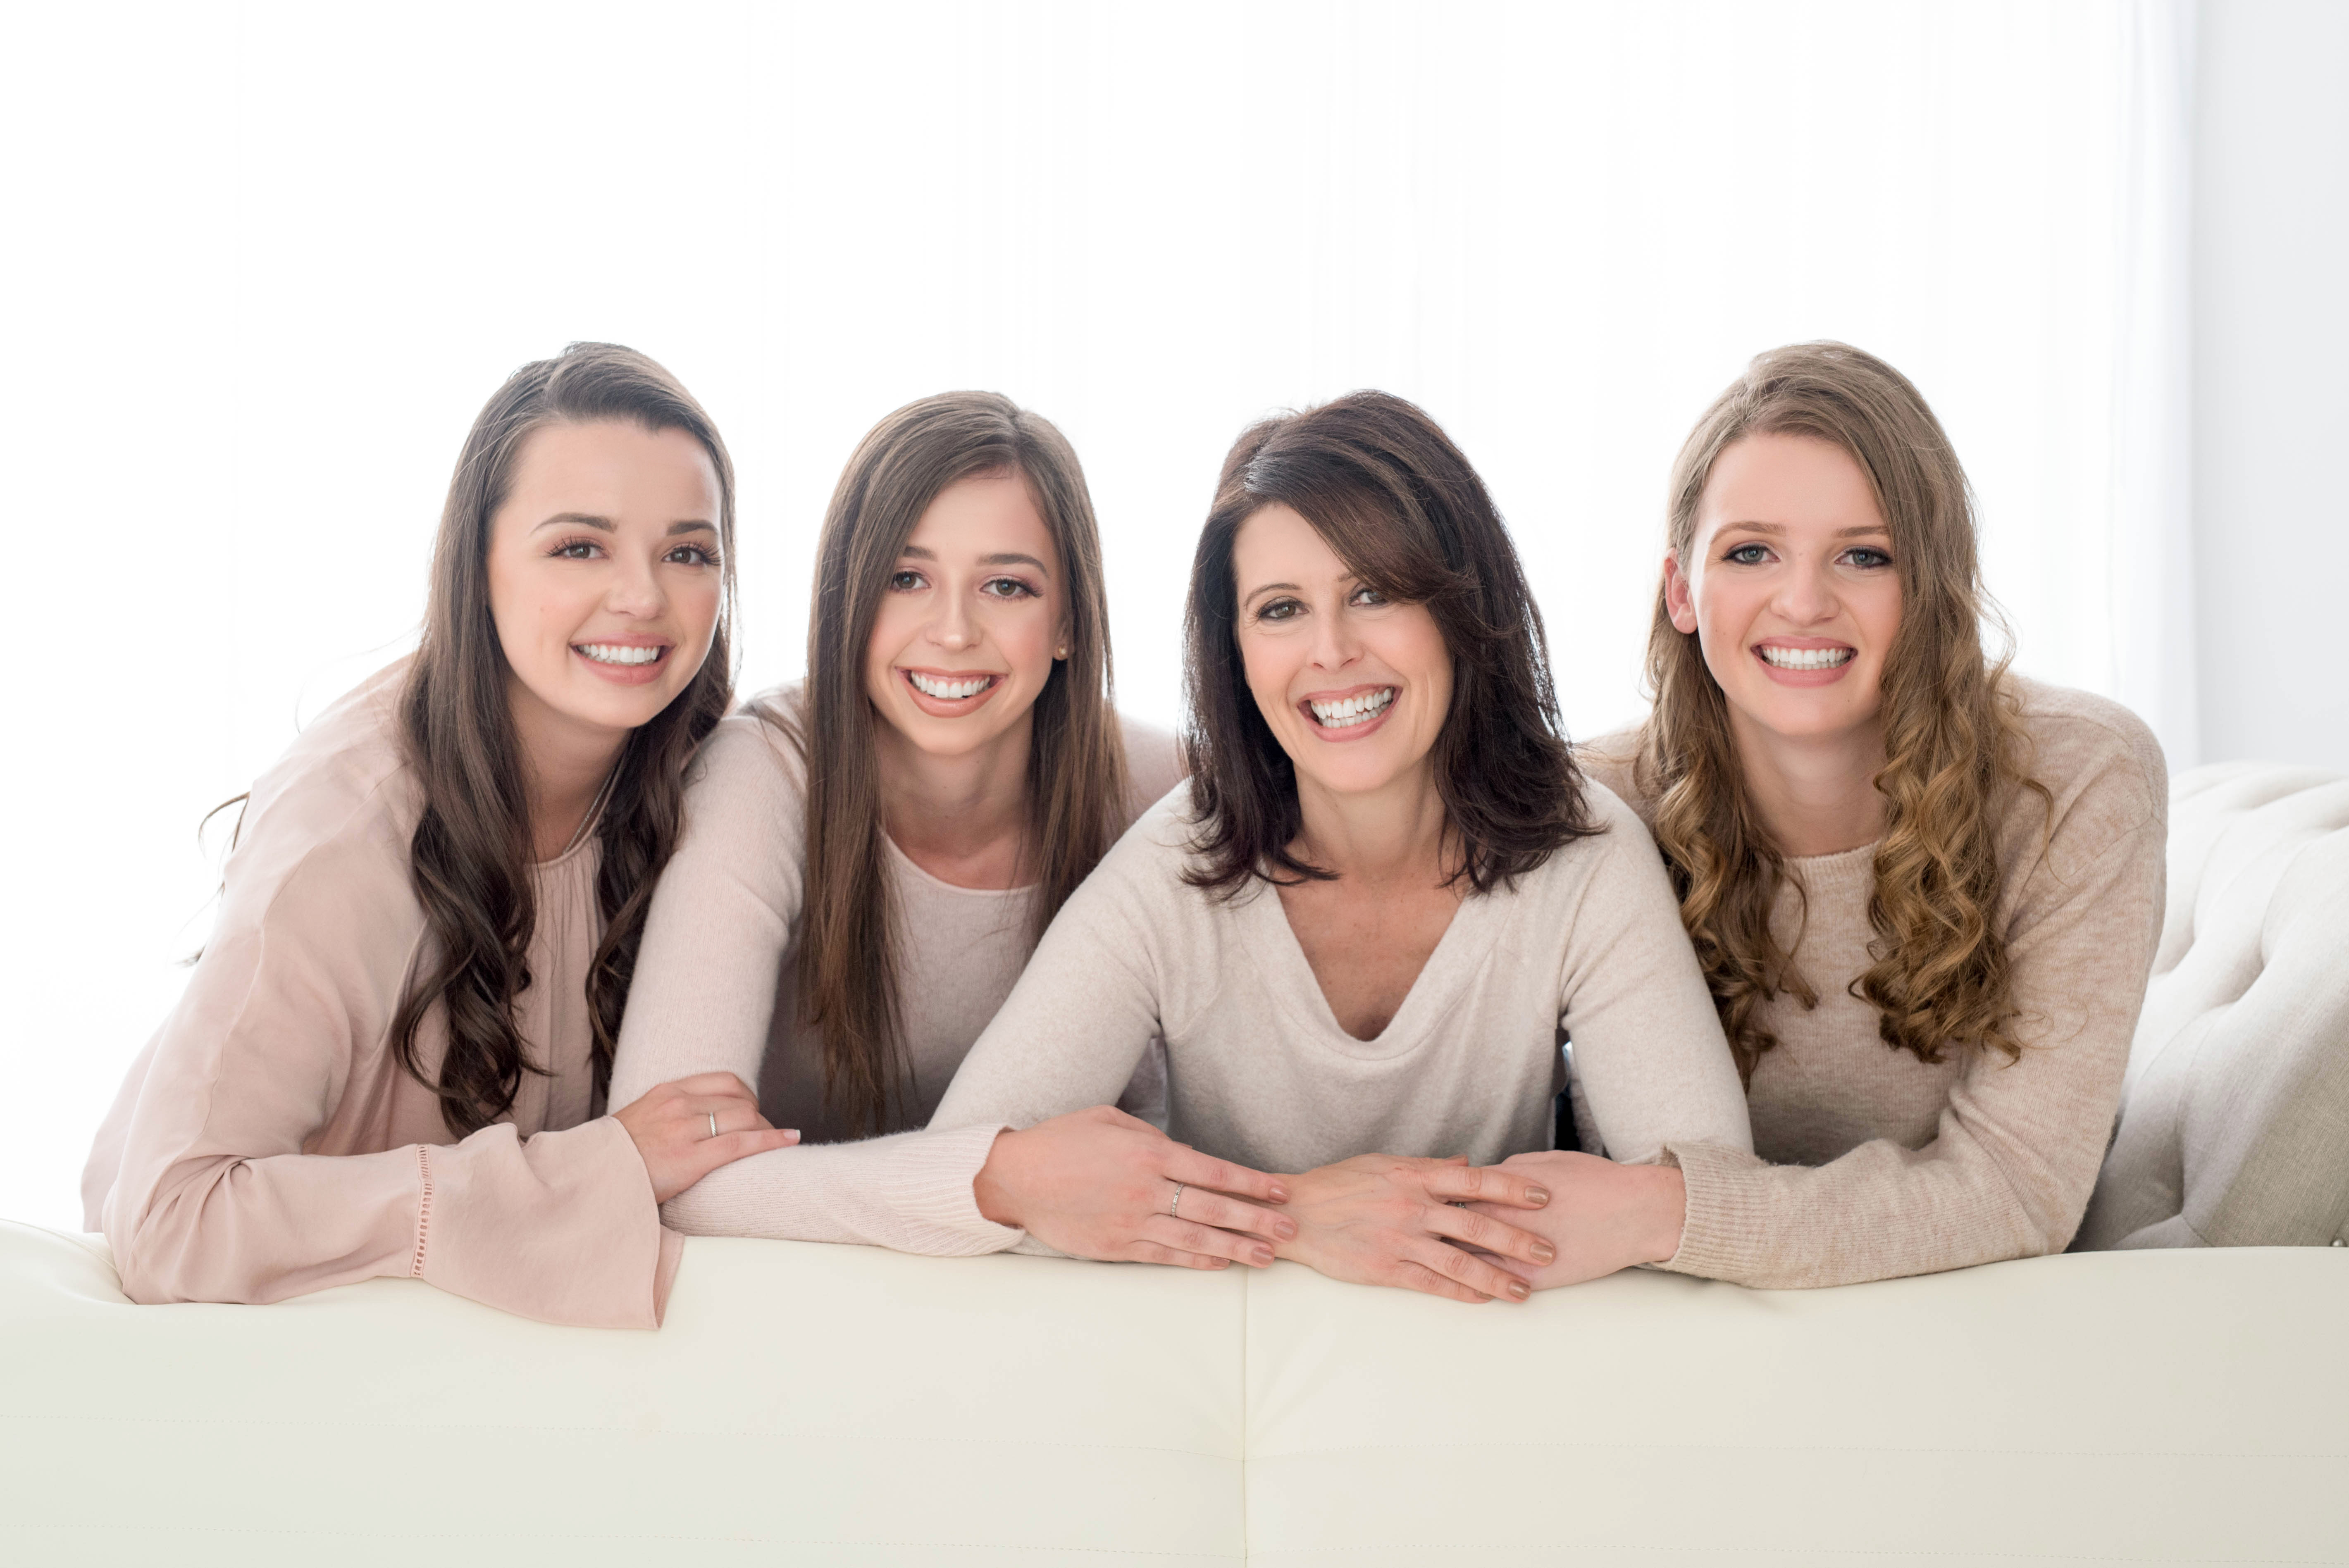 LDS Activity Day Ideas: Mother Daughter Relaxation Retreat!